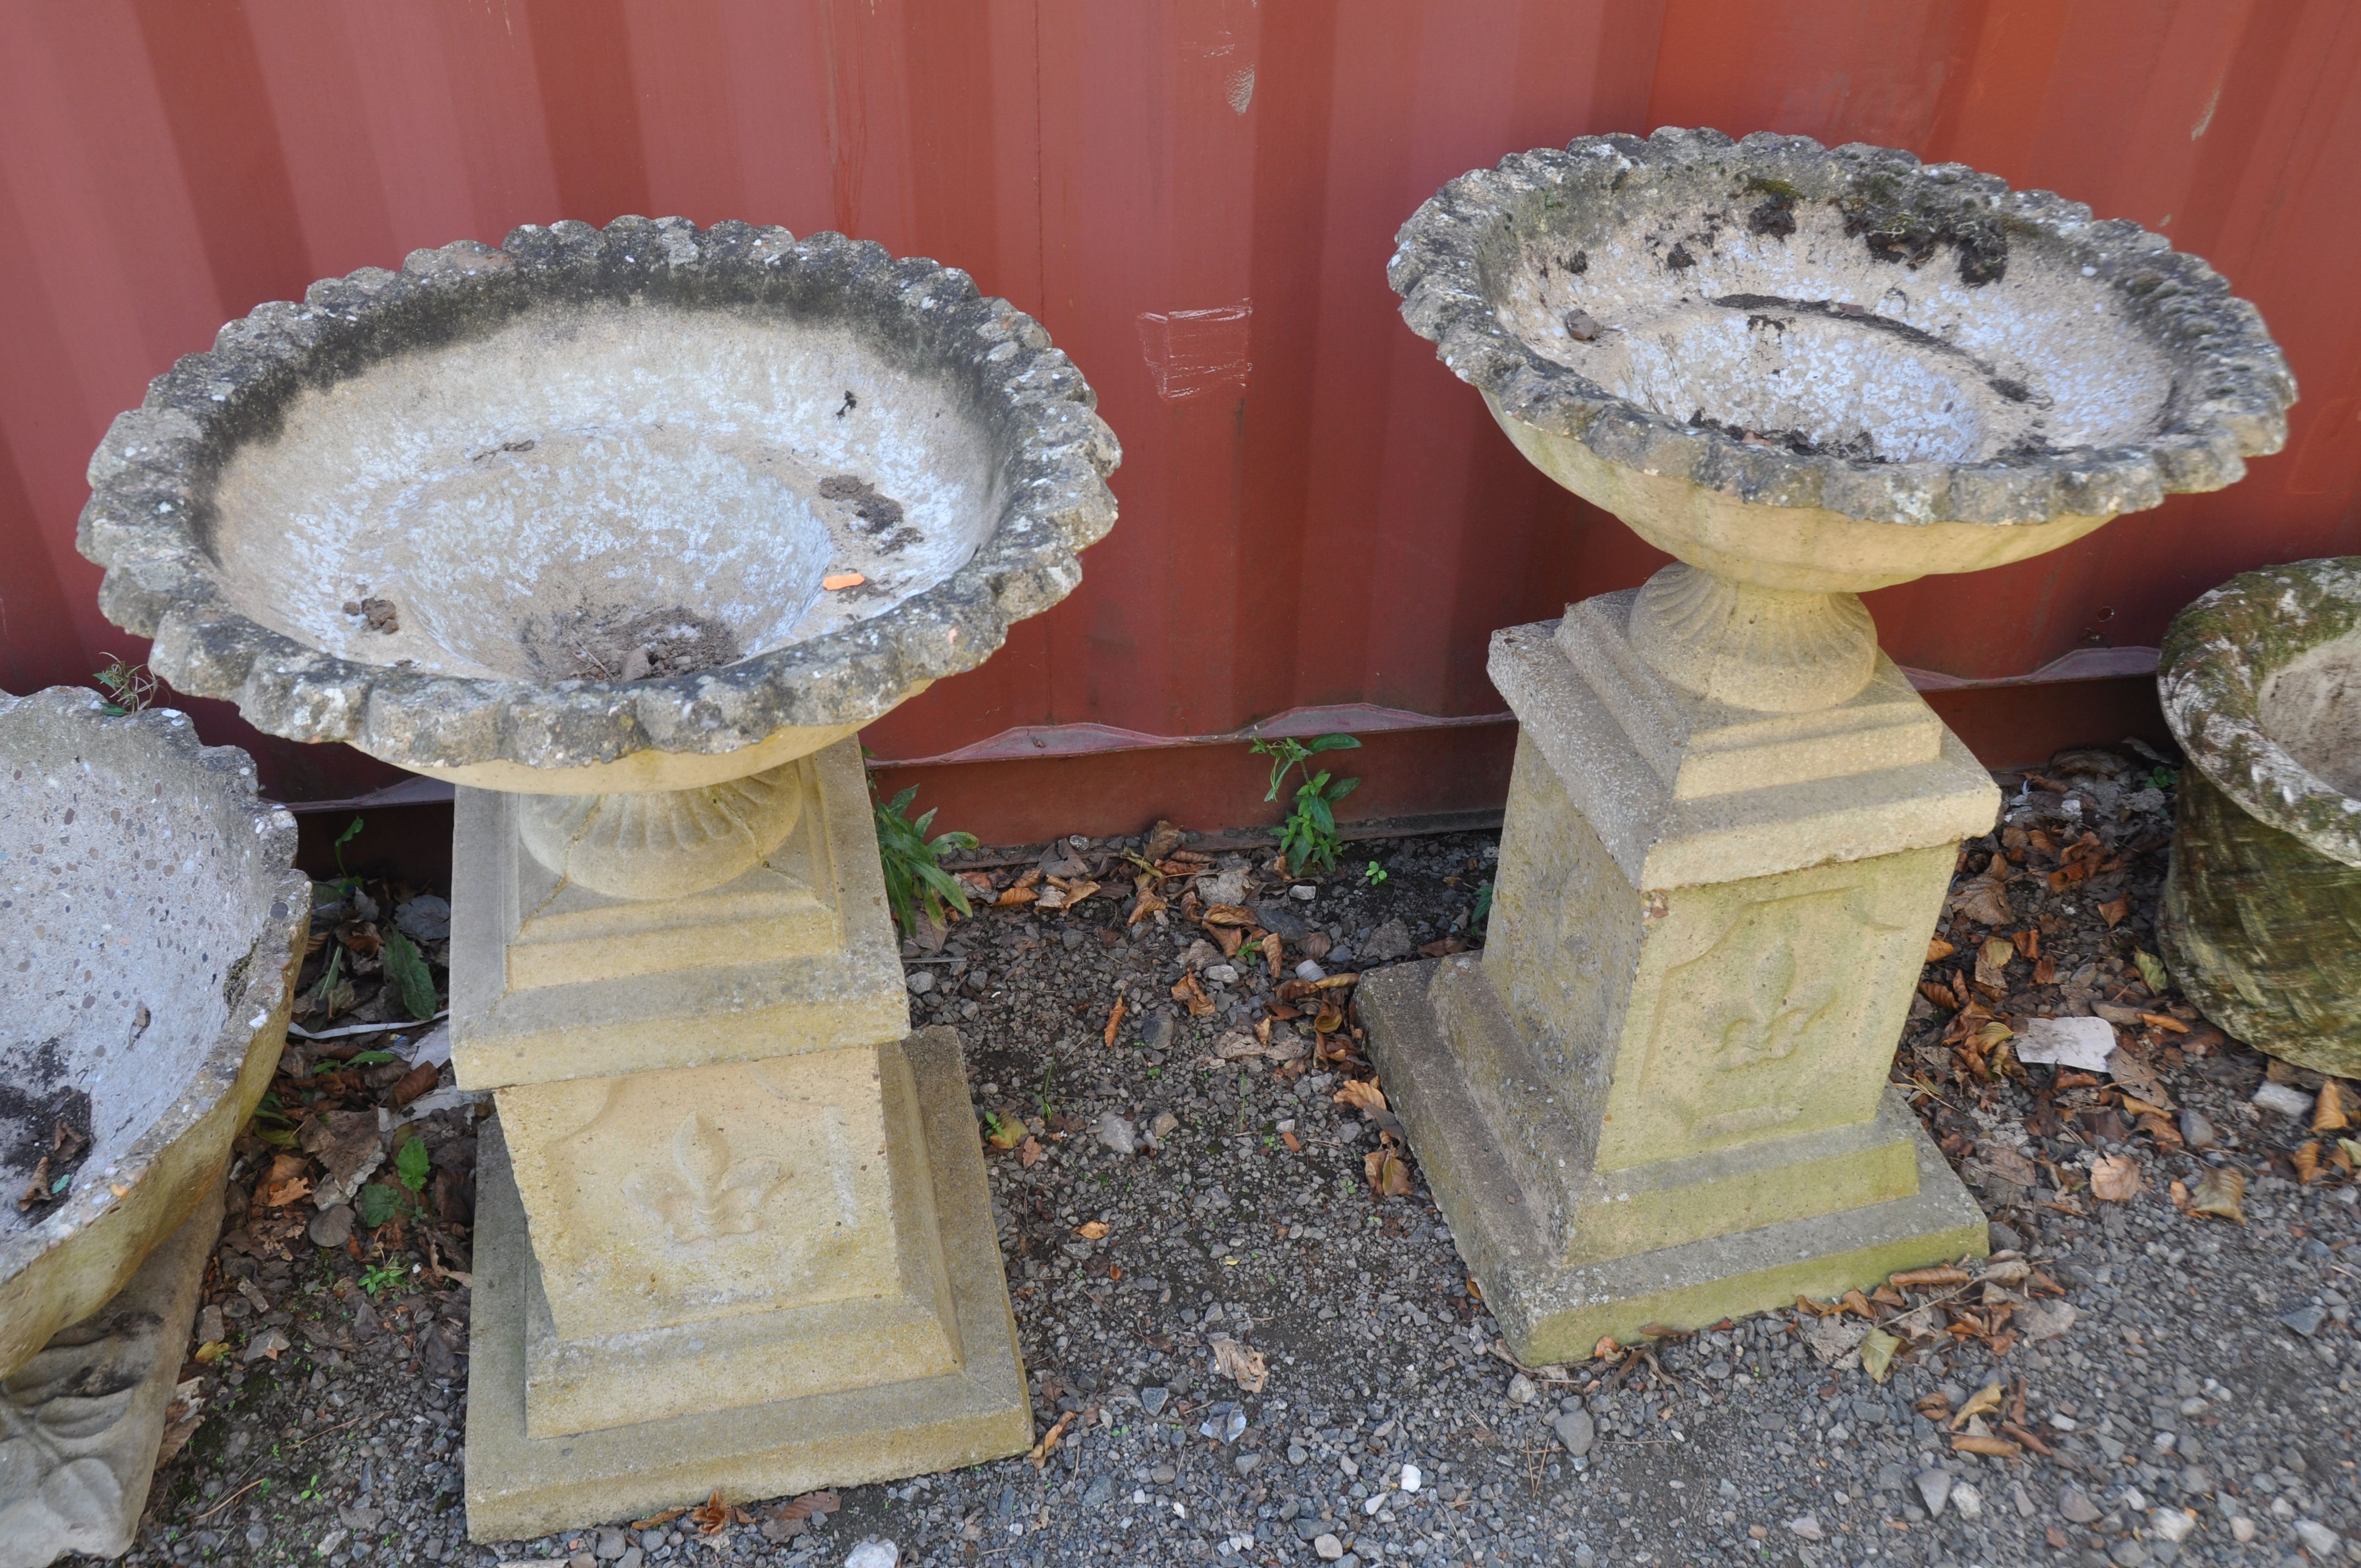 A PAIR OF MODRN COMPOSITE GARDEN URNS on square columns with pie crust top edges, baluster and